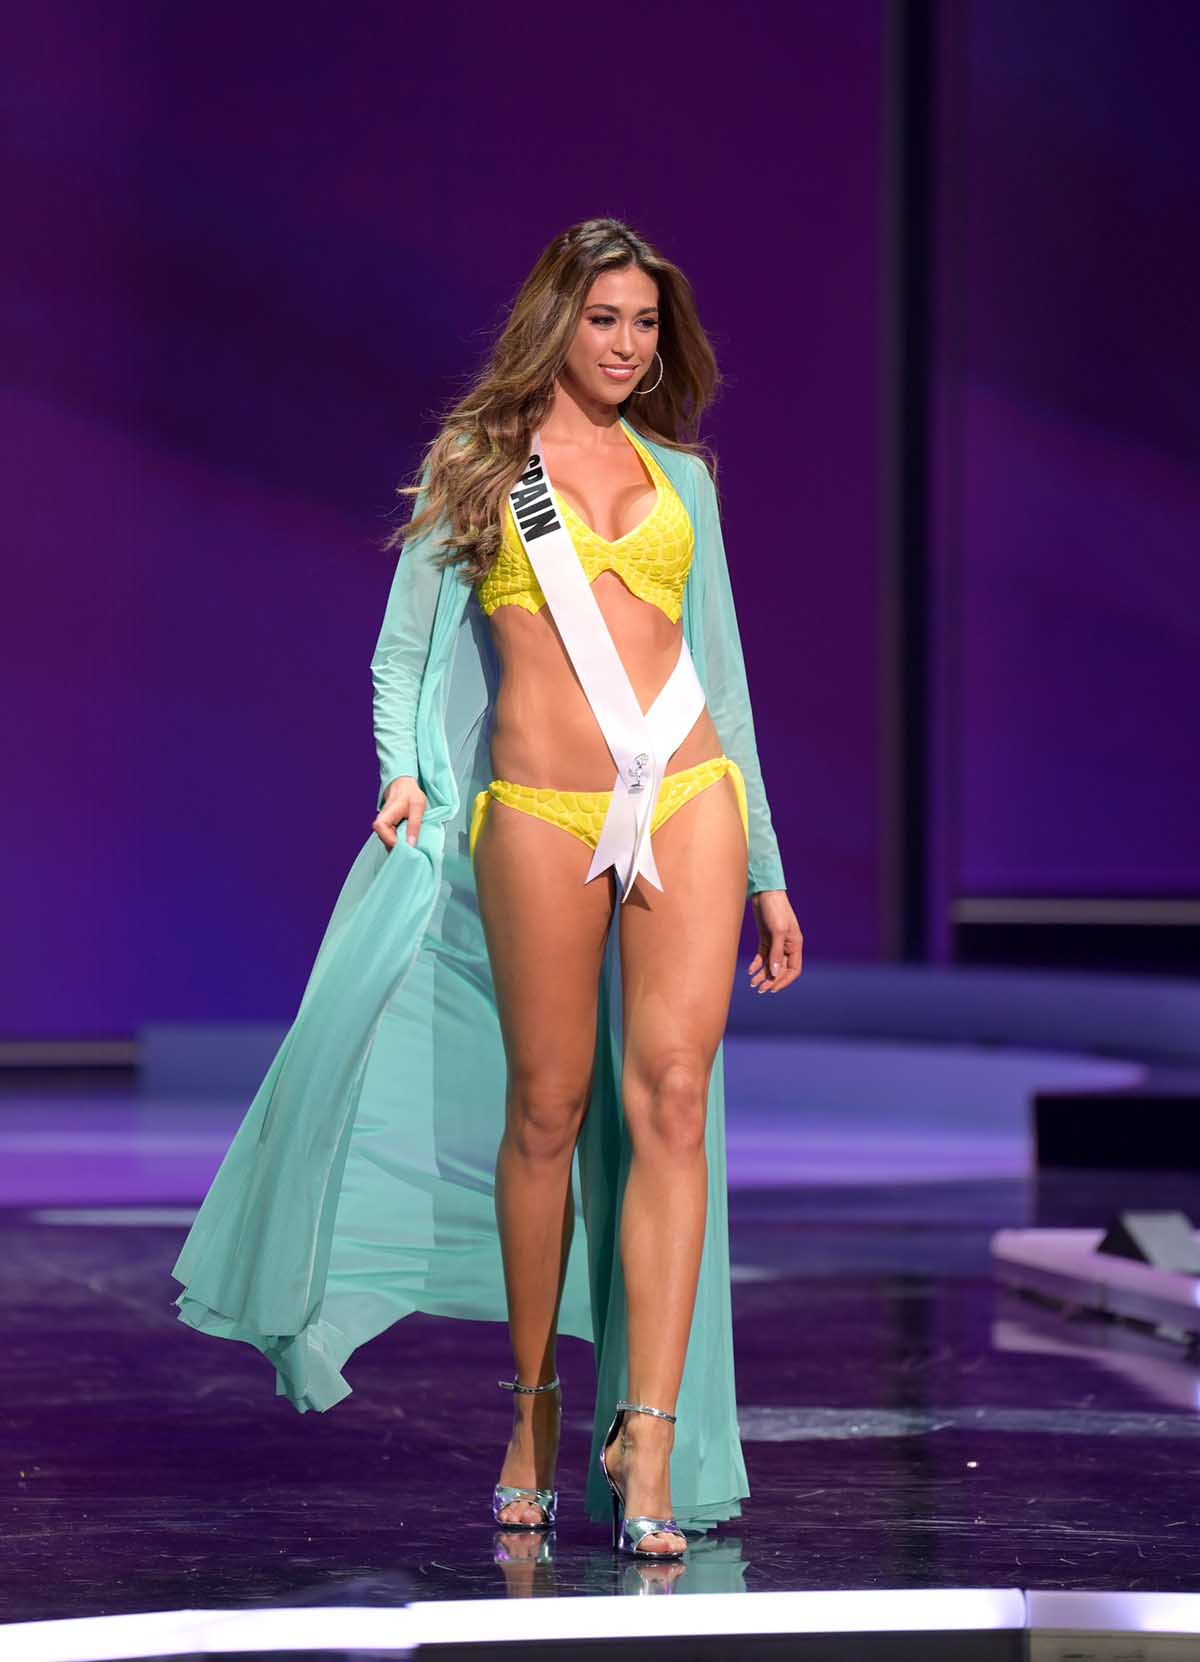 Andrea Martínez, Miss Universe Spain 2020 competes on stage in Ema Savahl swimwear during the MISS UNIVERSE® Preliminary Competition at the Seminole Hard Rock Hotel & Casino in Hollywood, Florida on May 14, 2021. Tune in to the live telecast on FYI and Telemundo on Sunday, May 16 at 8:00 PM ET to see who will become the next Miss Universe.